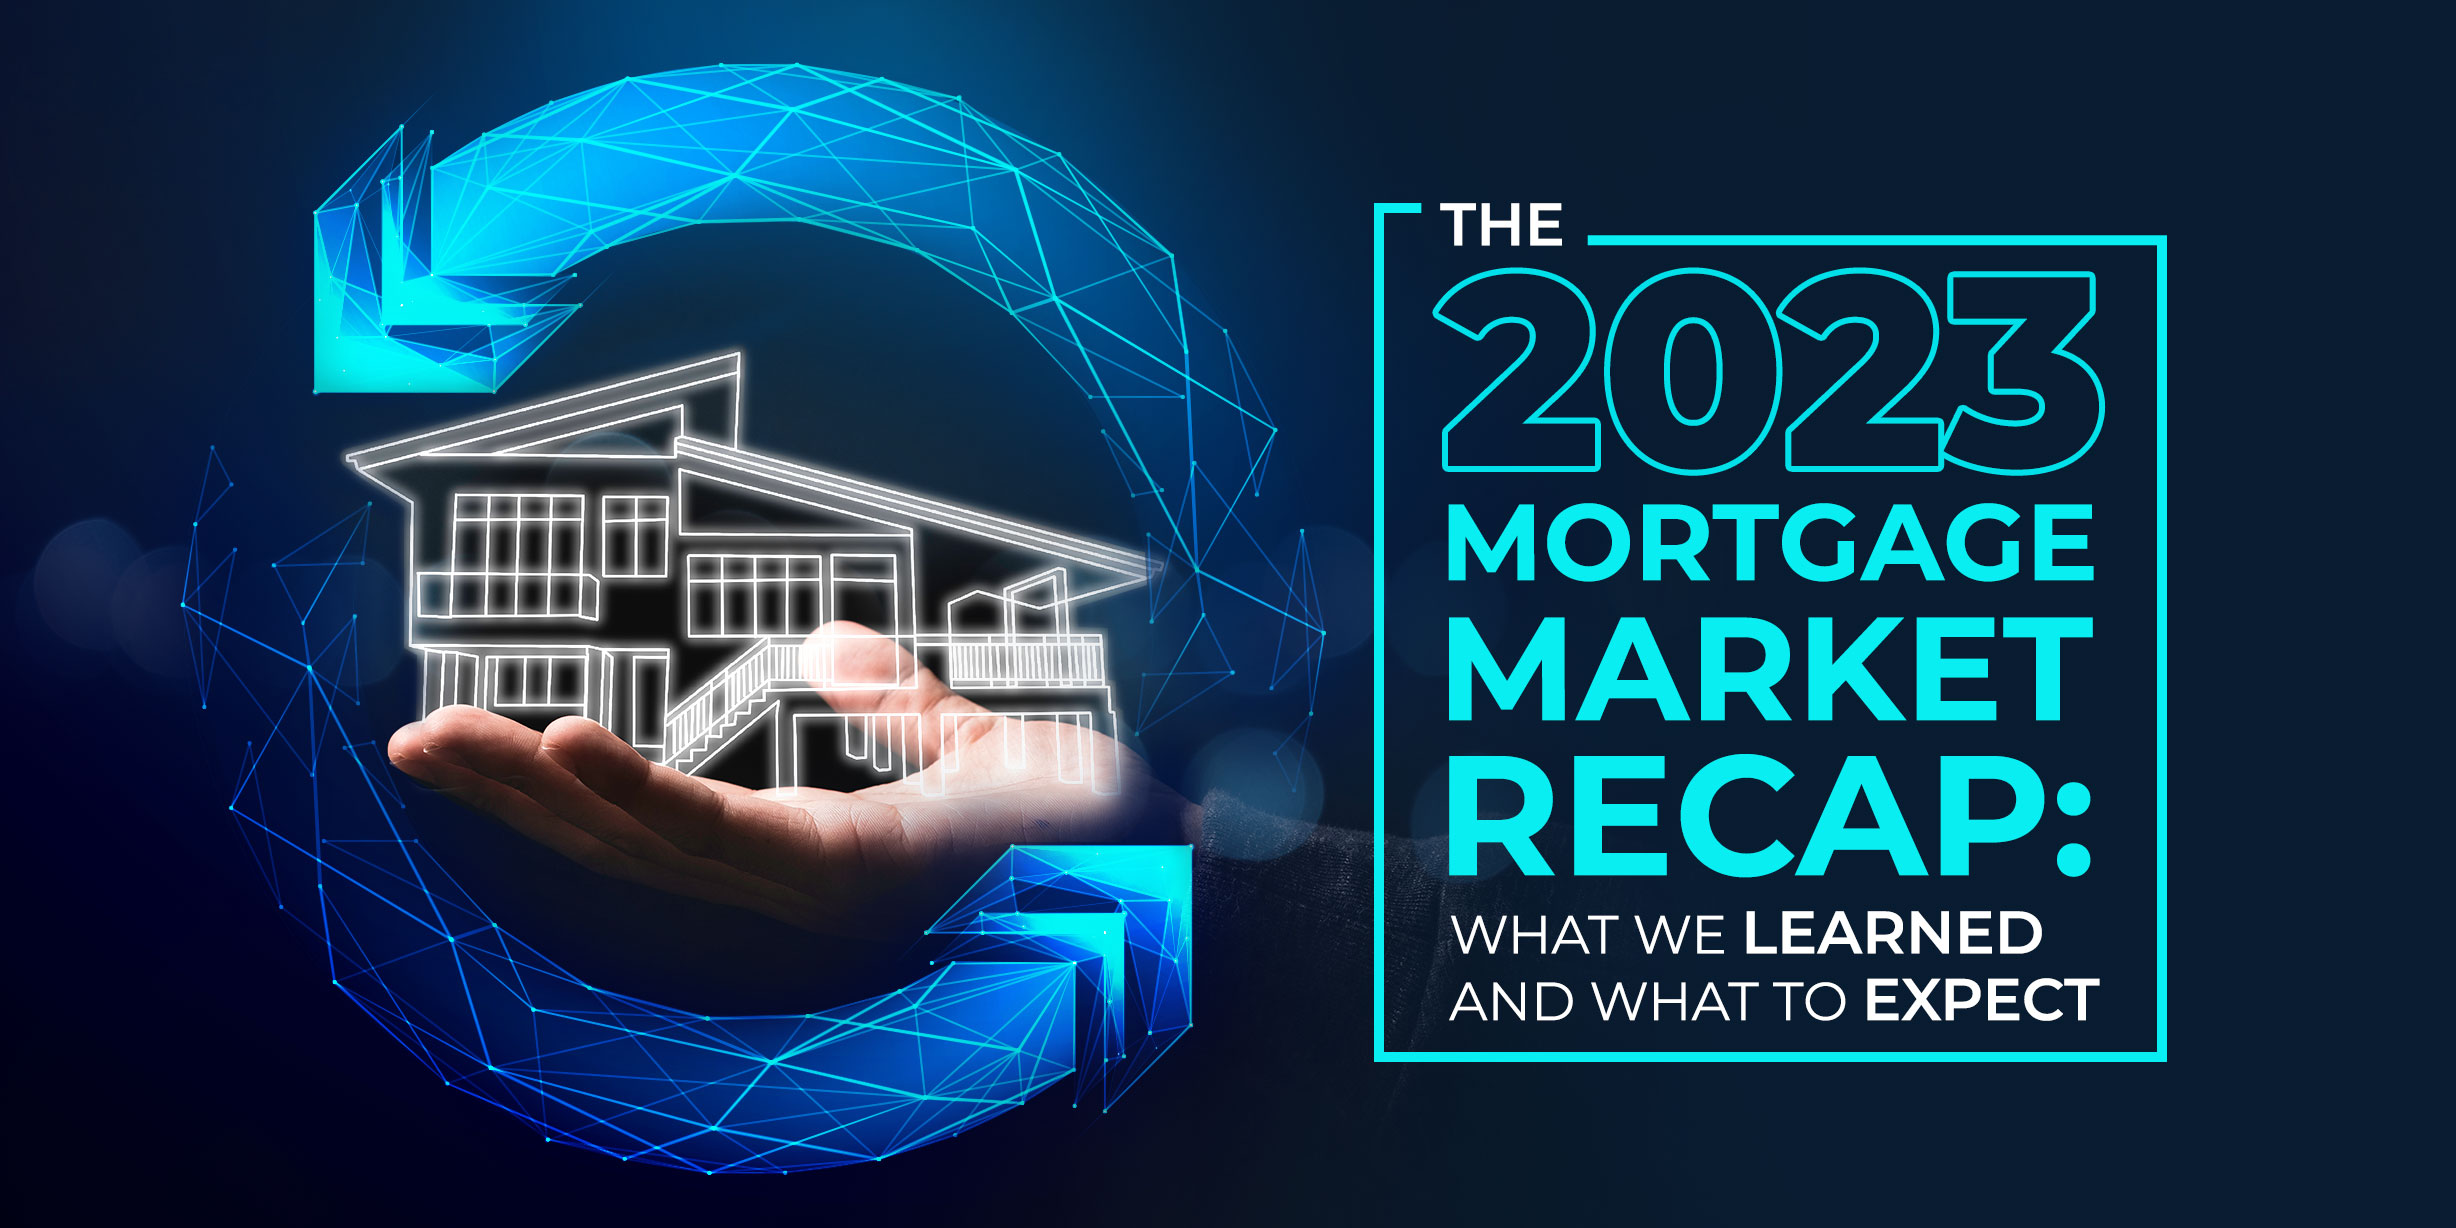 The 2023 Mortgage Market Recap: What We Learned and What to Expect